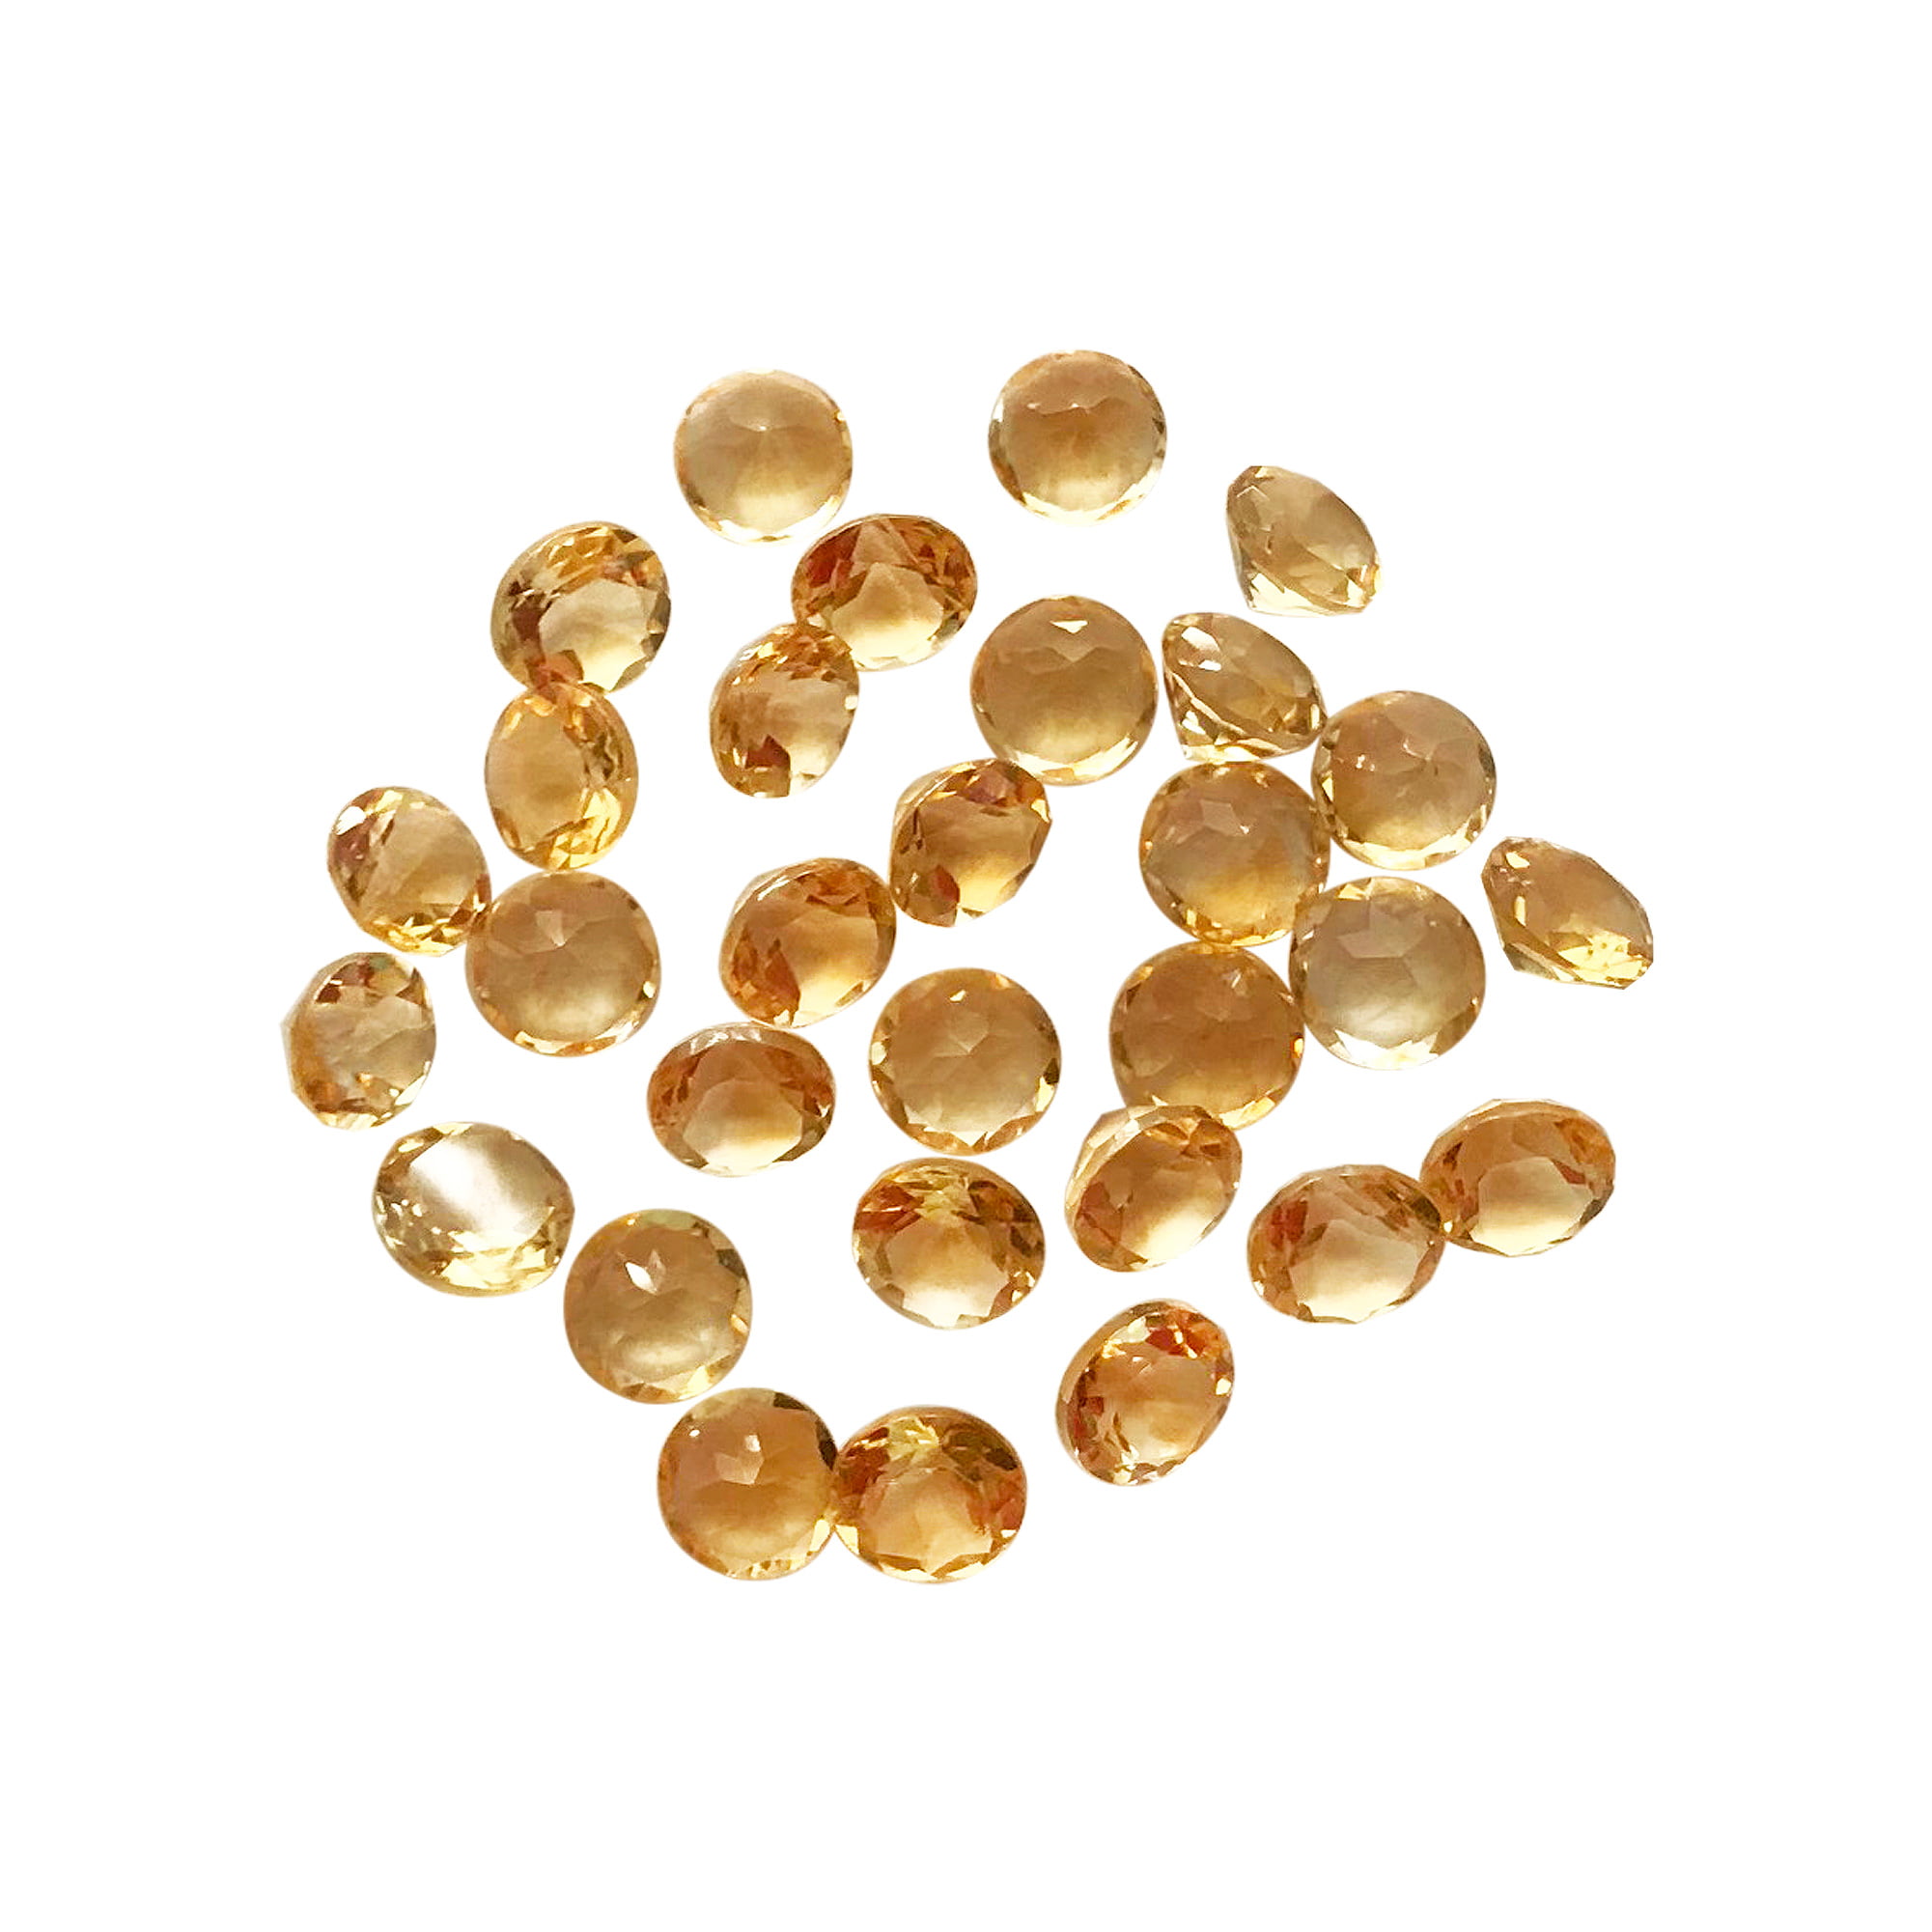 100% Natural Golden Citrine 2 mm Round CutStone Top Quality Loose Gemstone Lot 